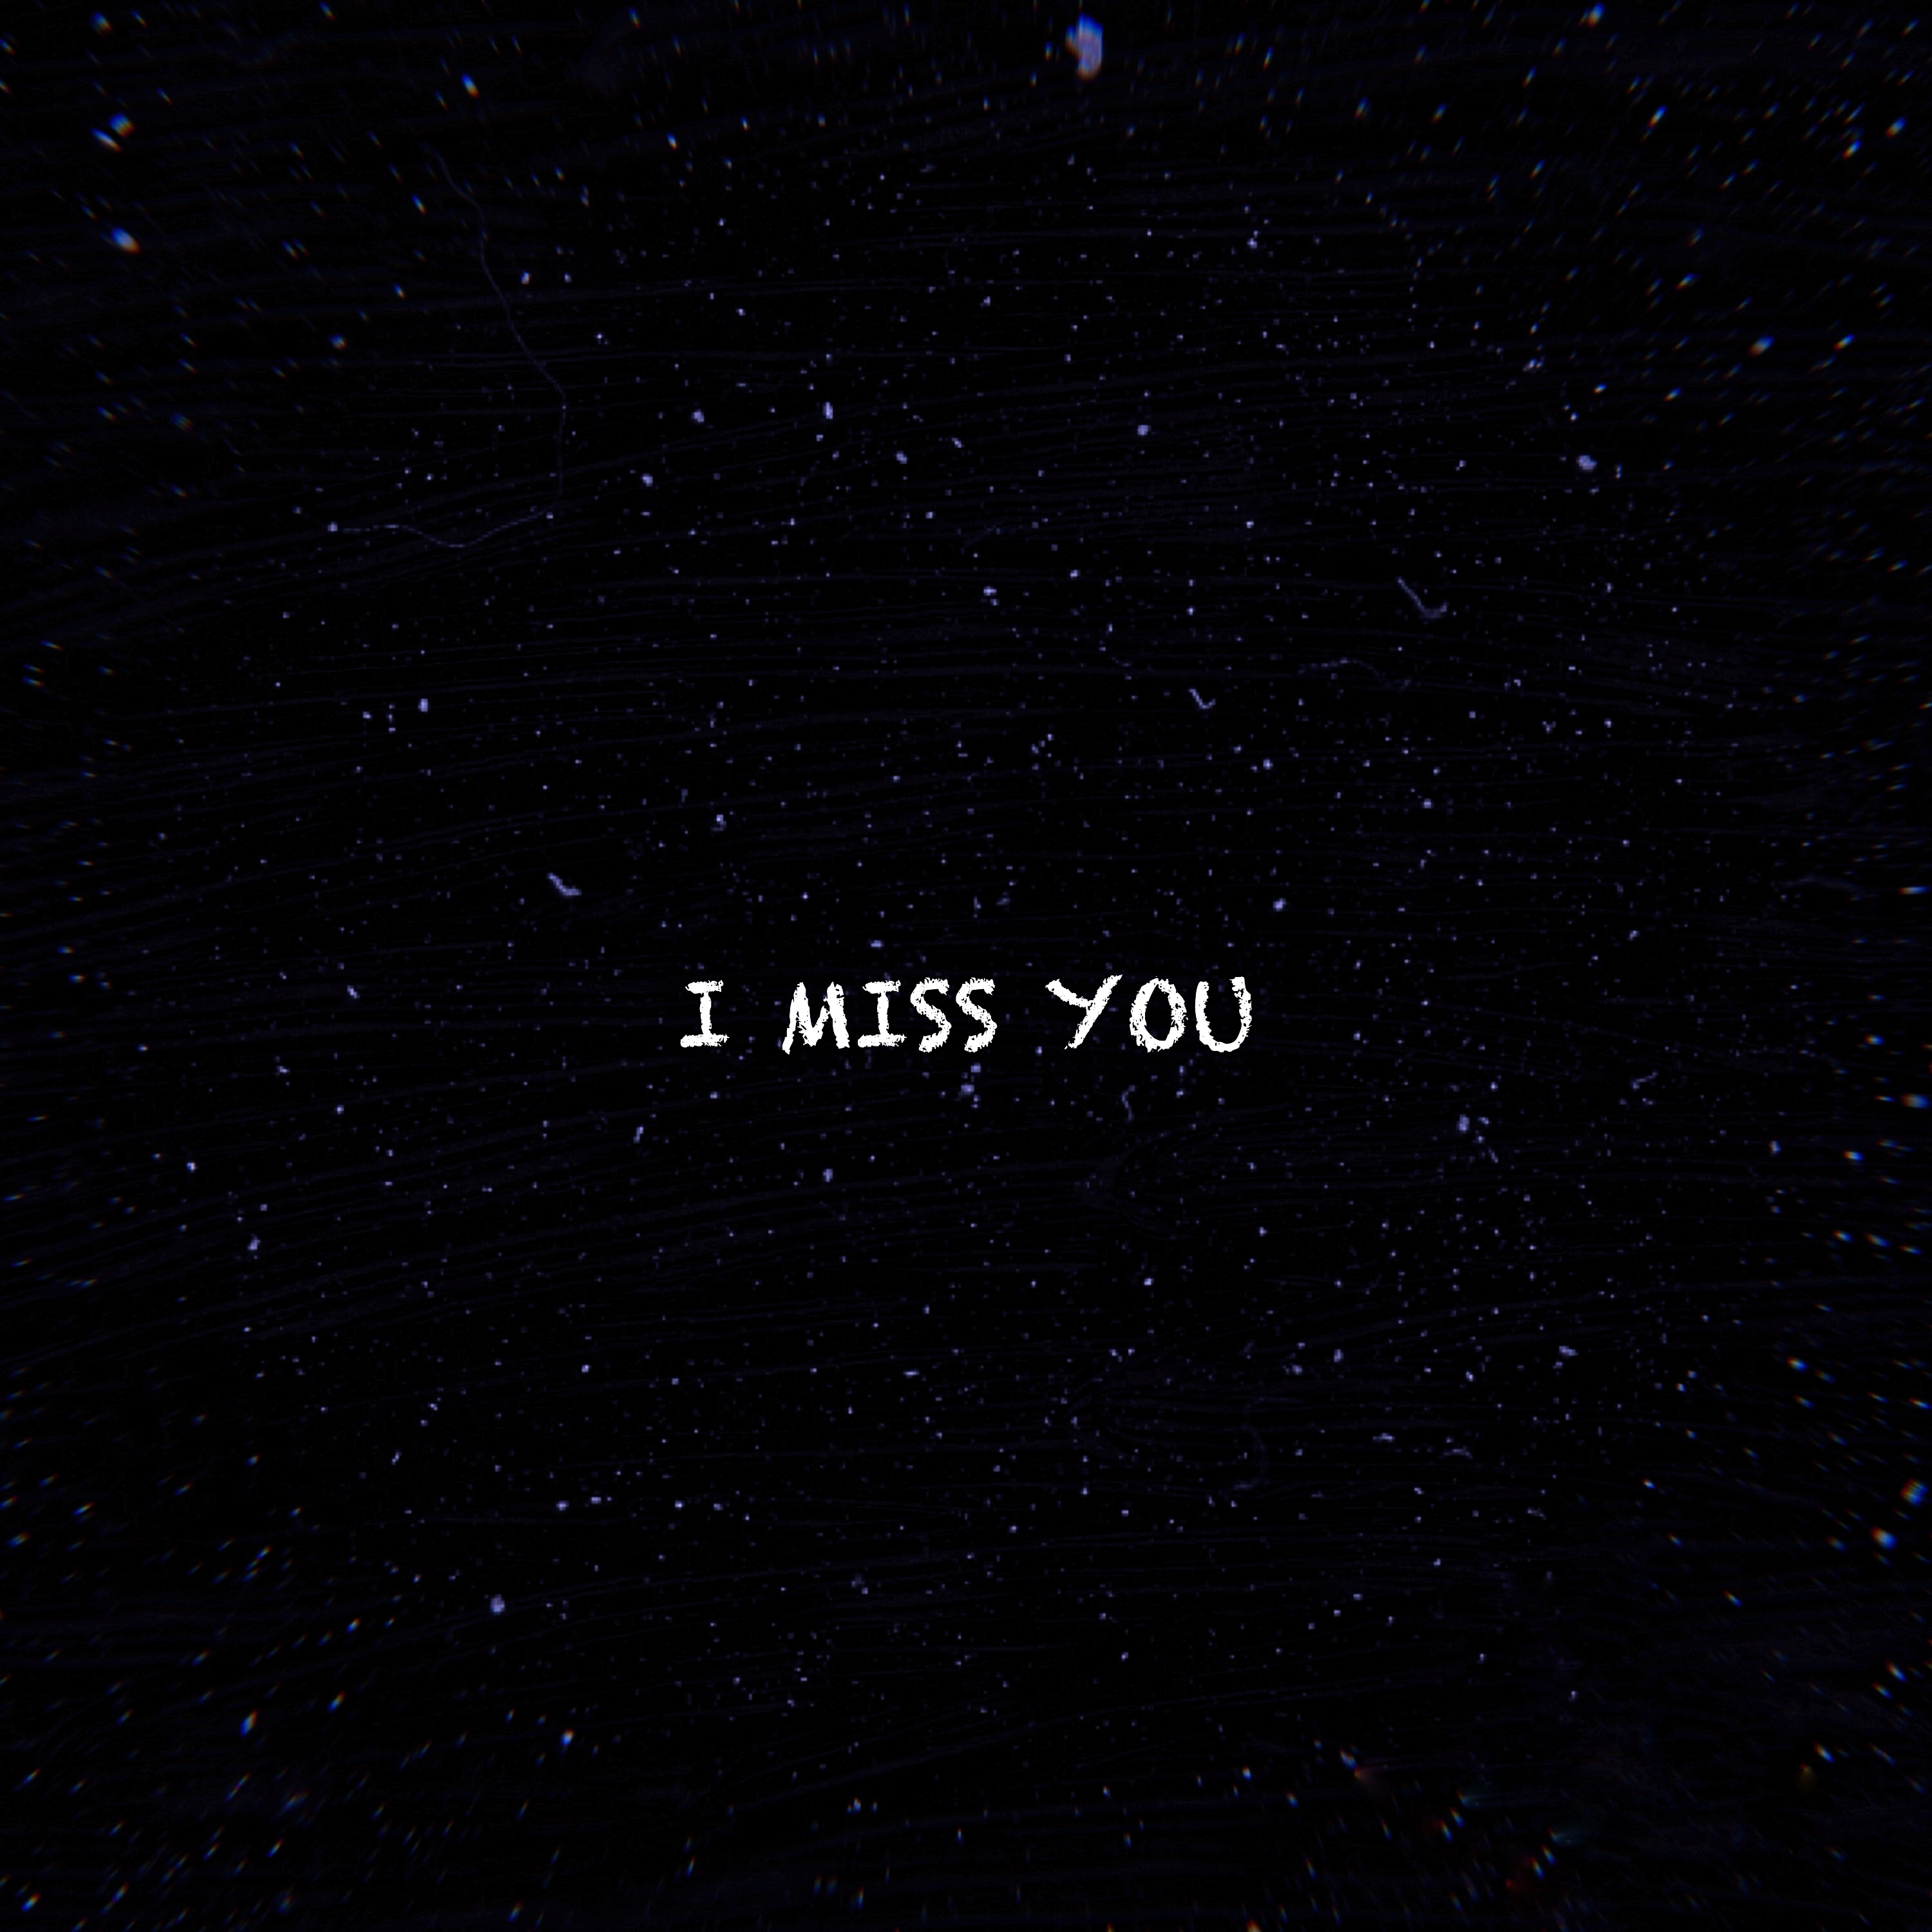 88492 download wallpaper love, words, inscription, text, miss you, i miss you screensavers and pictures for free